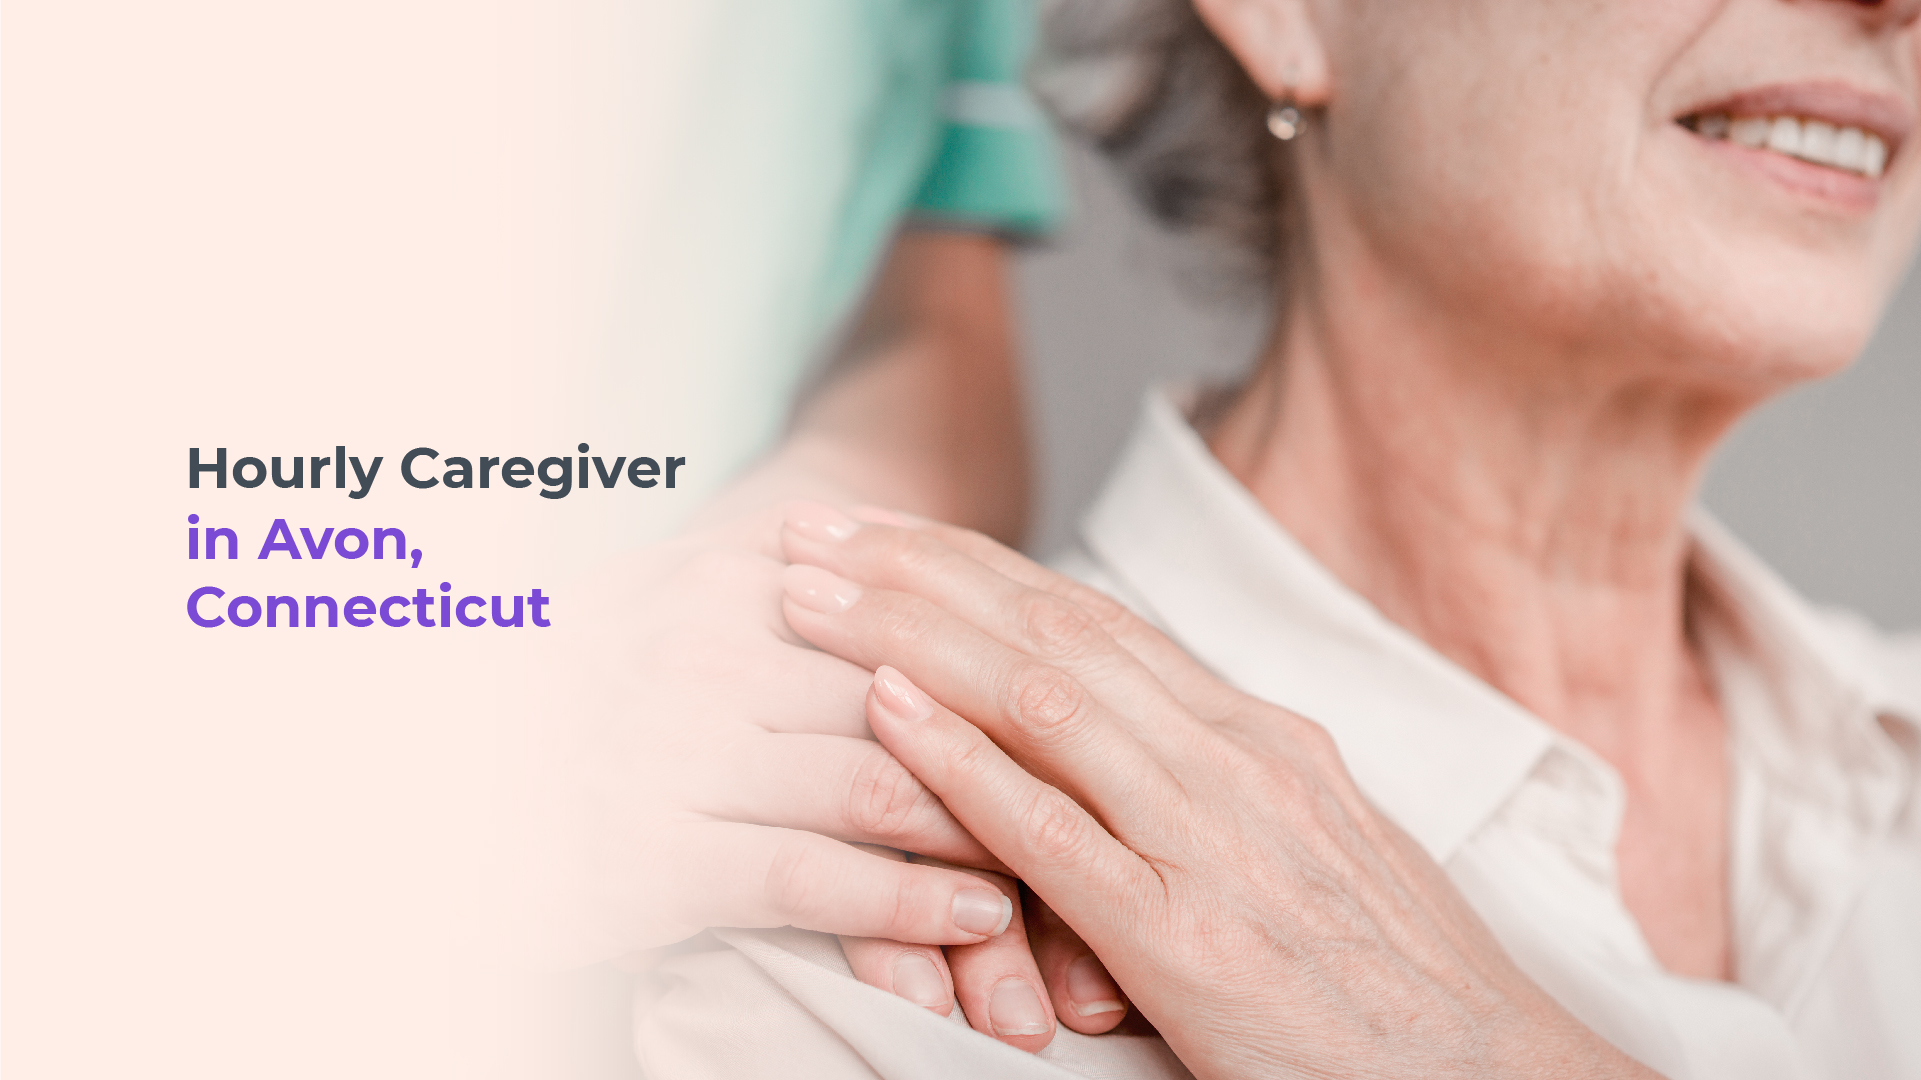 Hourly Caregivers in Avon Connecticut